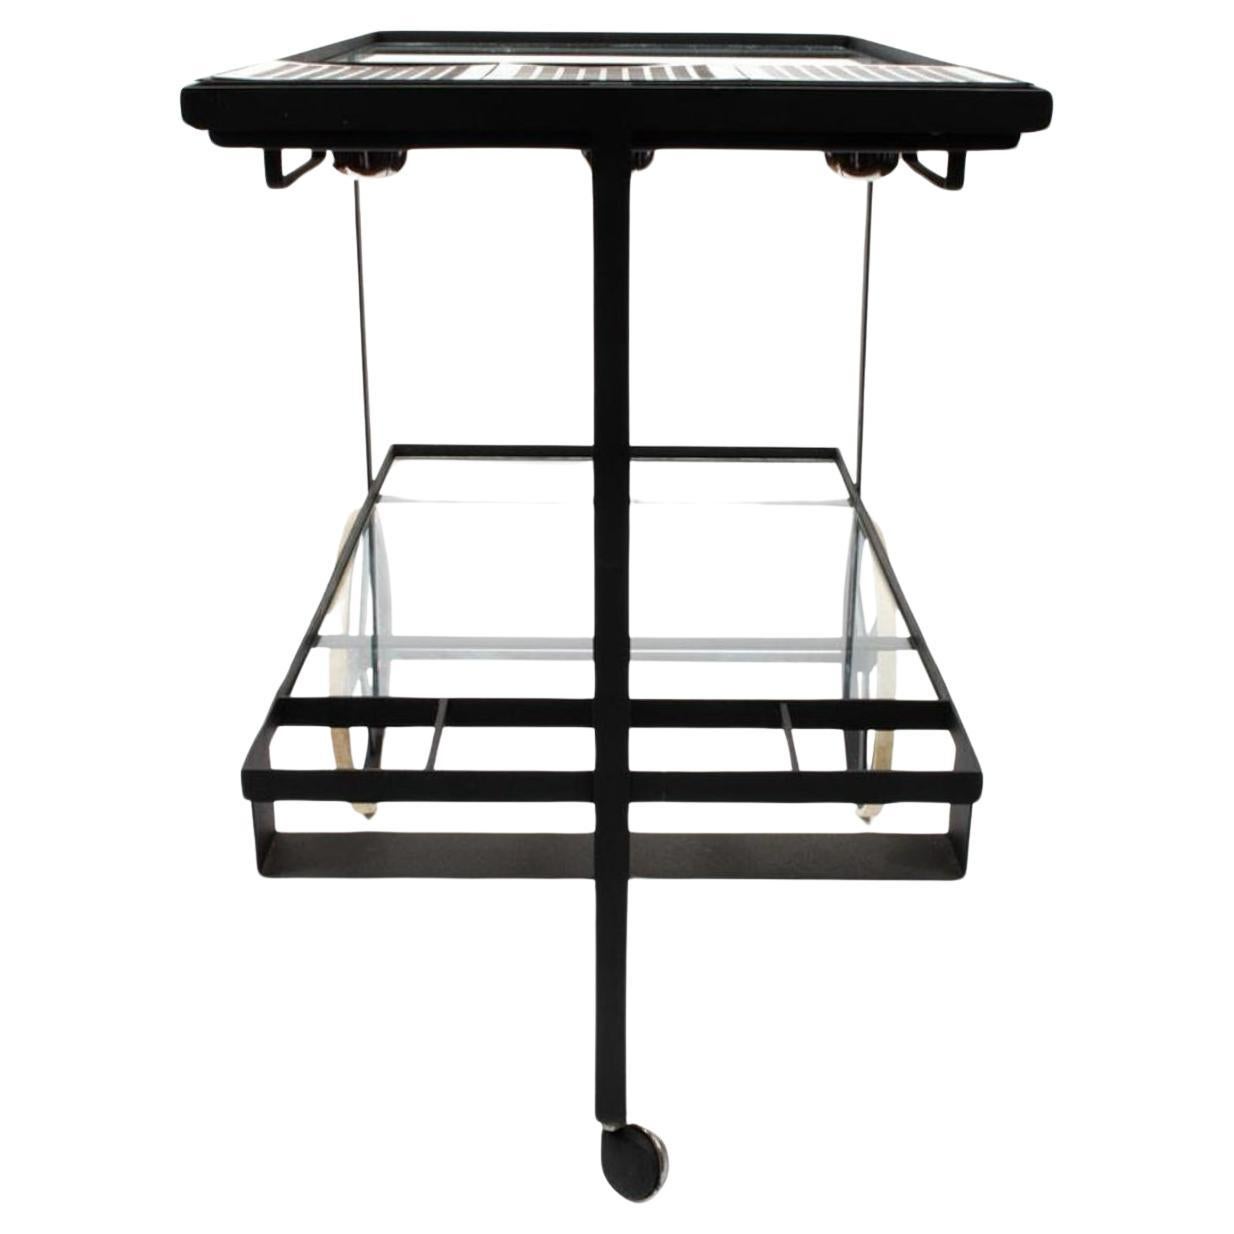 Metalwork Mid century Dutch modern steel and glass bar cart or tea trolley  For Sale